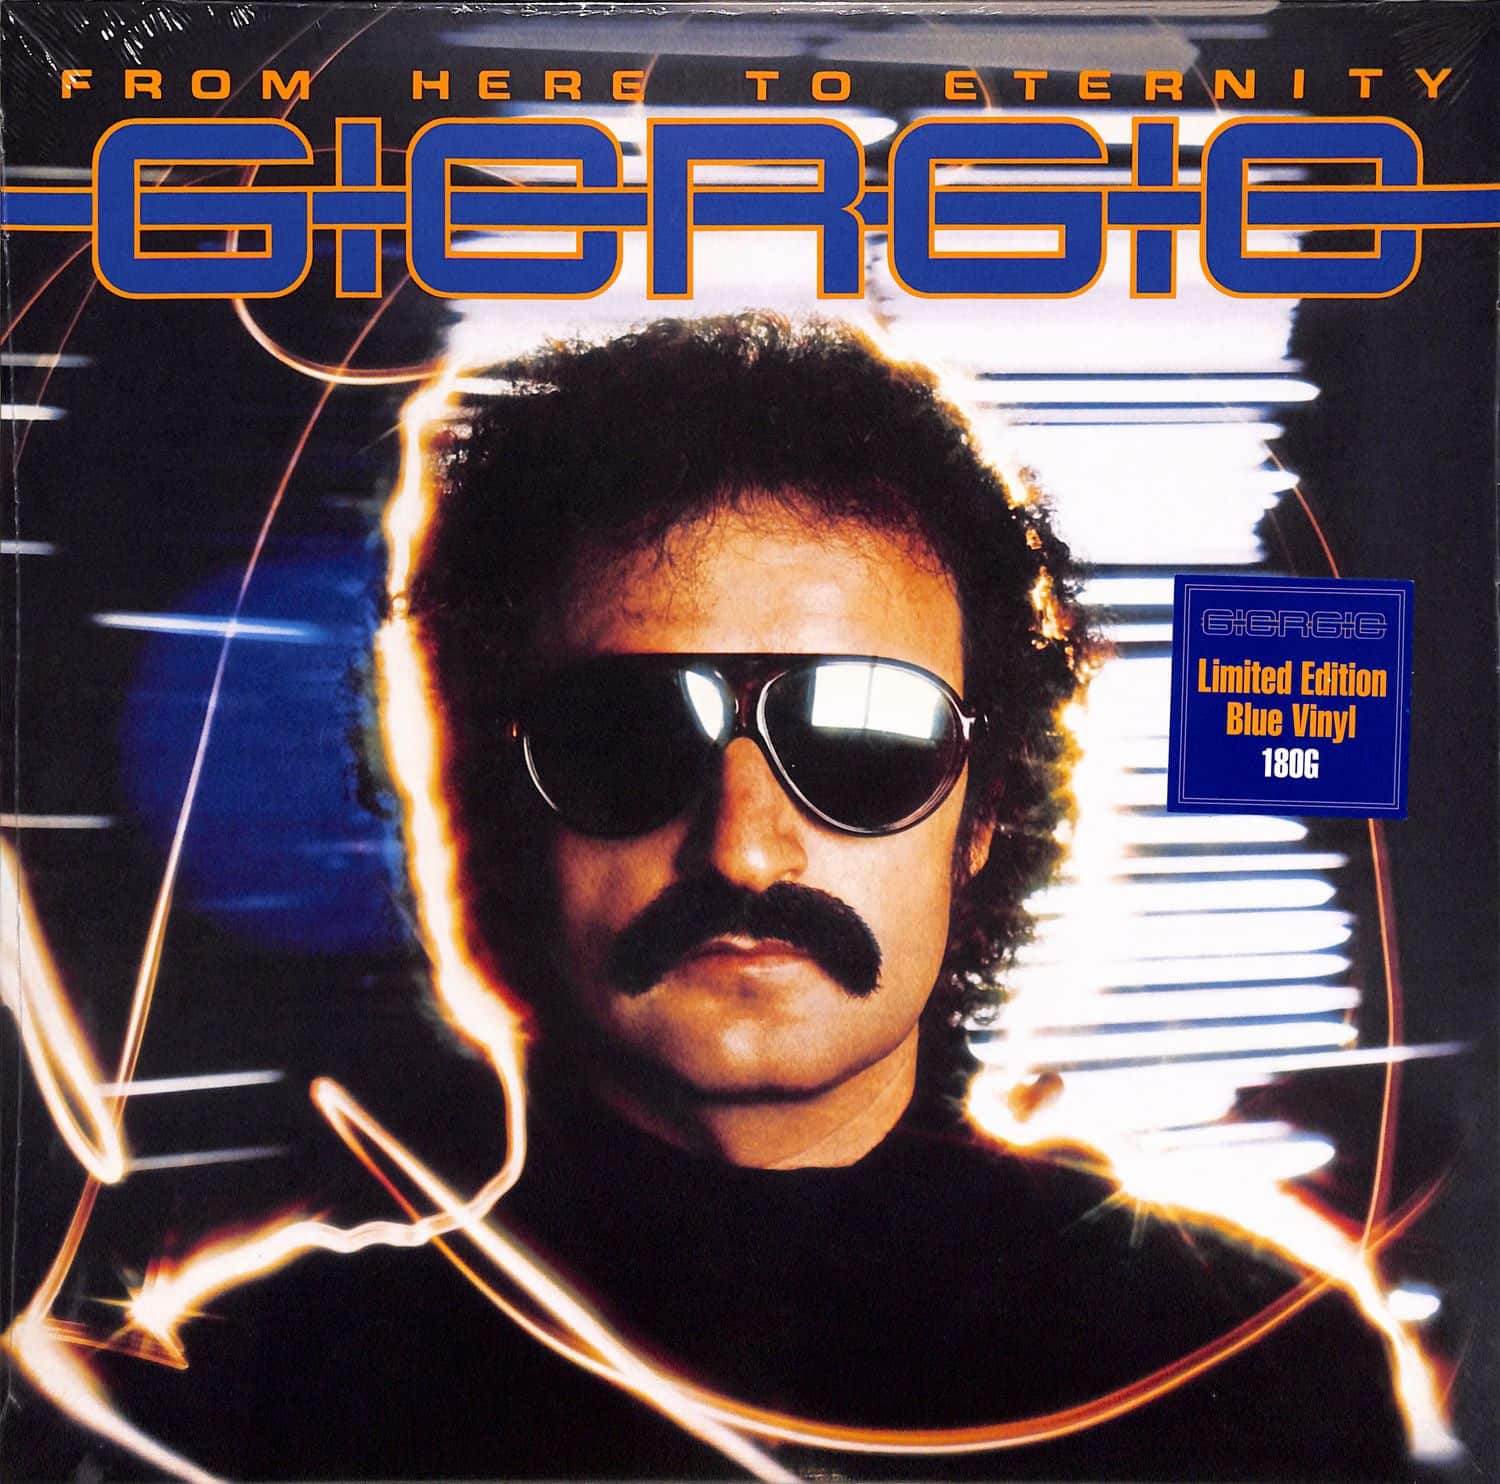 Giorgio Moroder - FROM HERE TO ETERNITY 